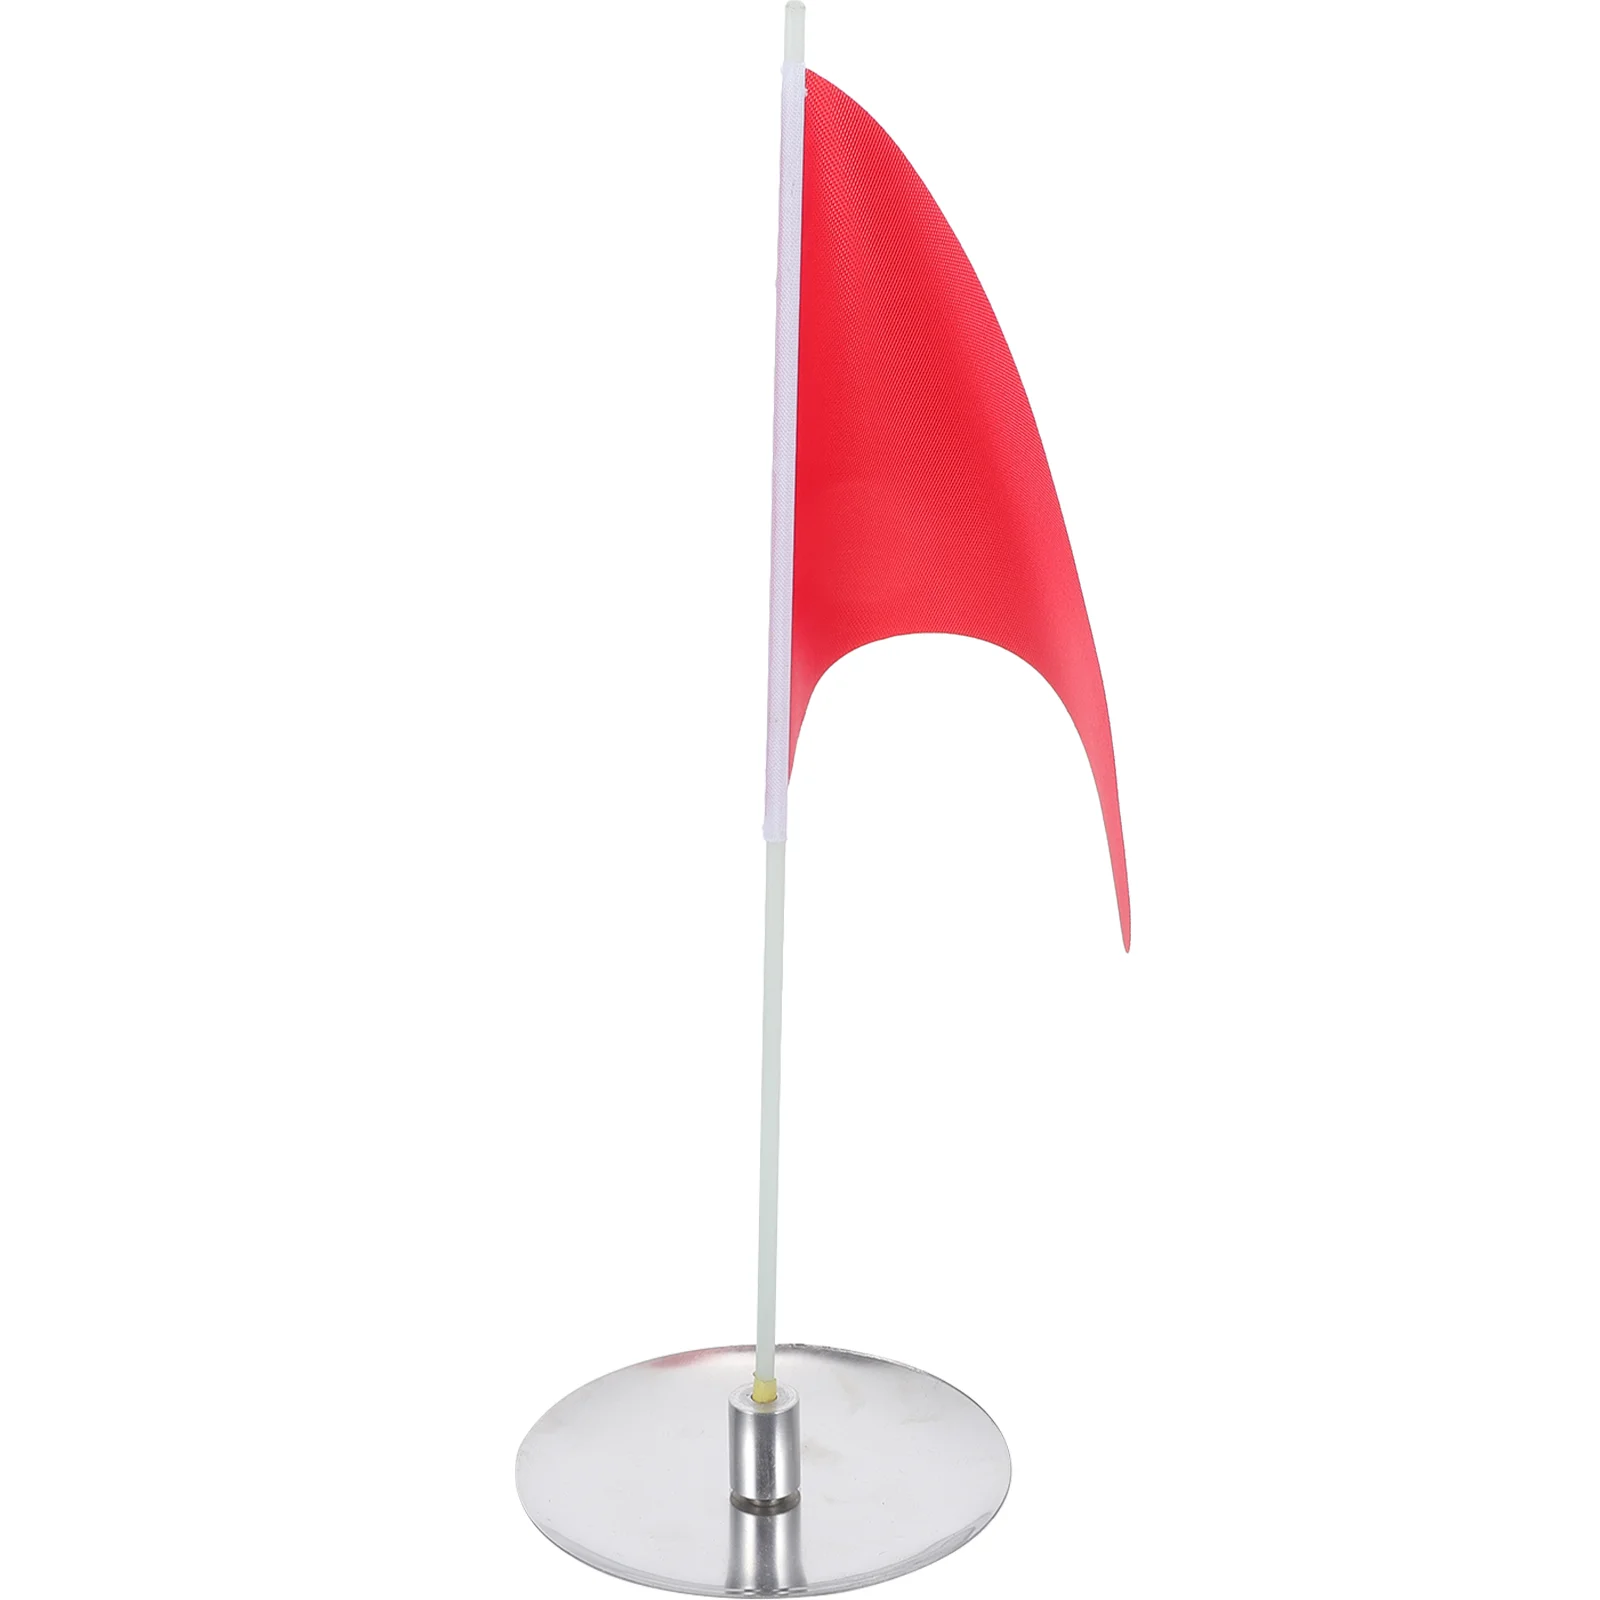 

Golf Flagpole Golfs Targeting Flags Portable Practice Golfing Stainless Steel Tray Training Tool Flagstick Mini